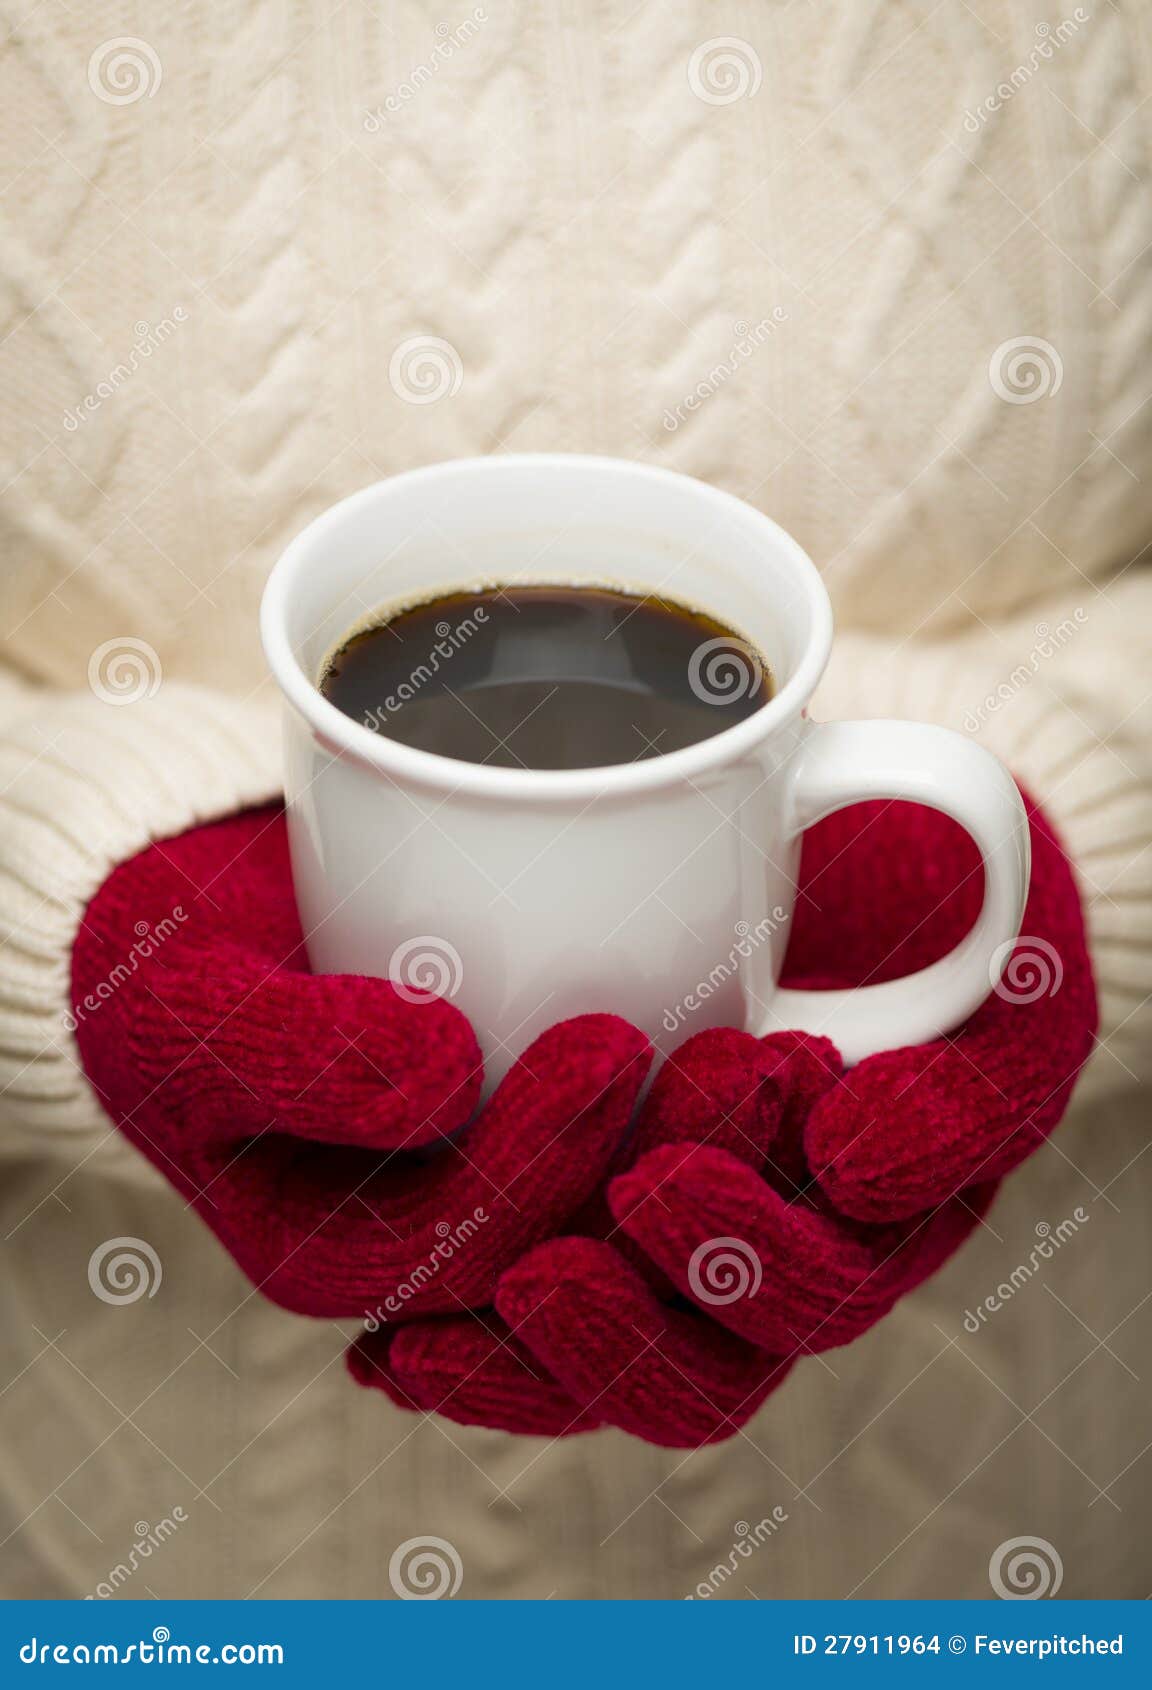 woman in sweater with red mittens holding cup of coffee